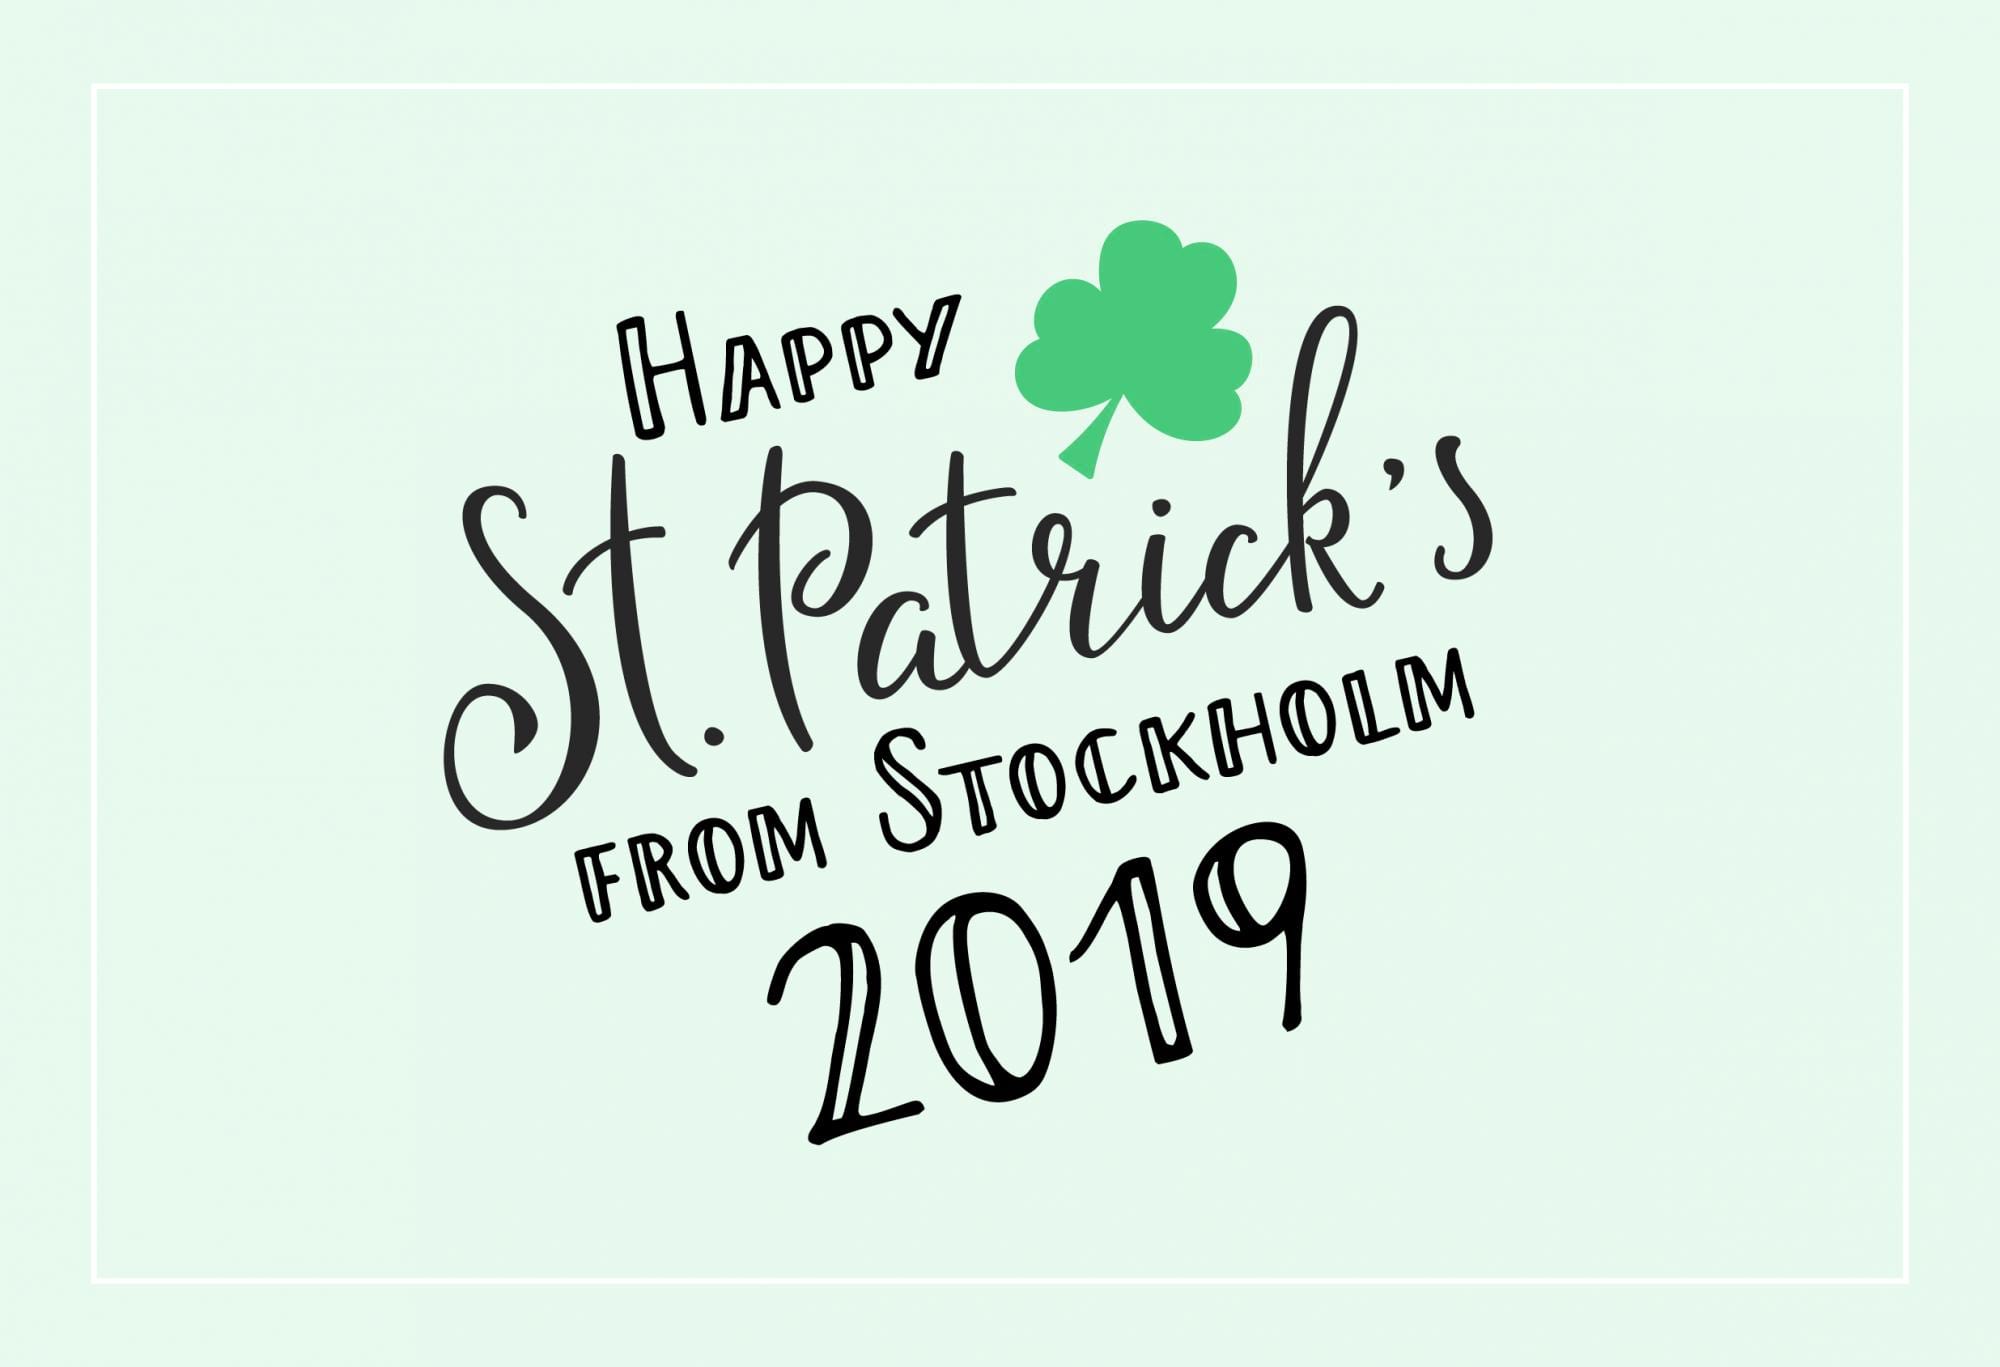 Happy St. Patrick's Day from Stockholm 2019